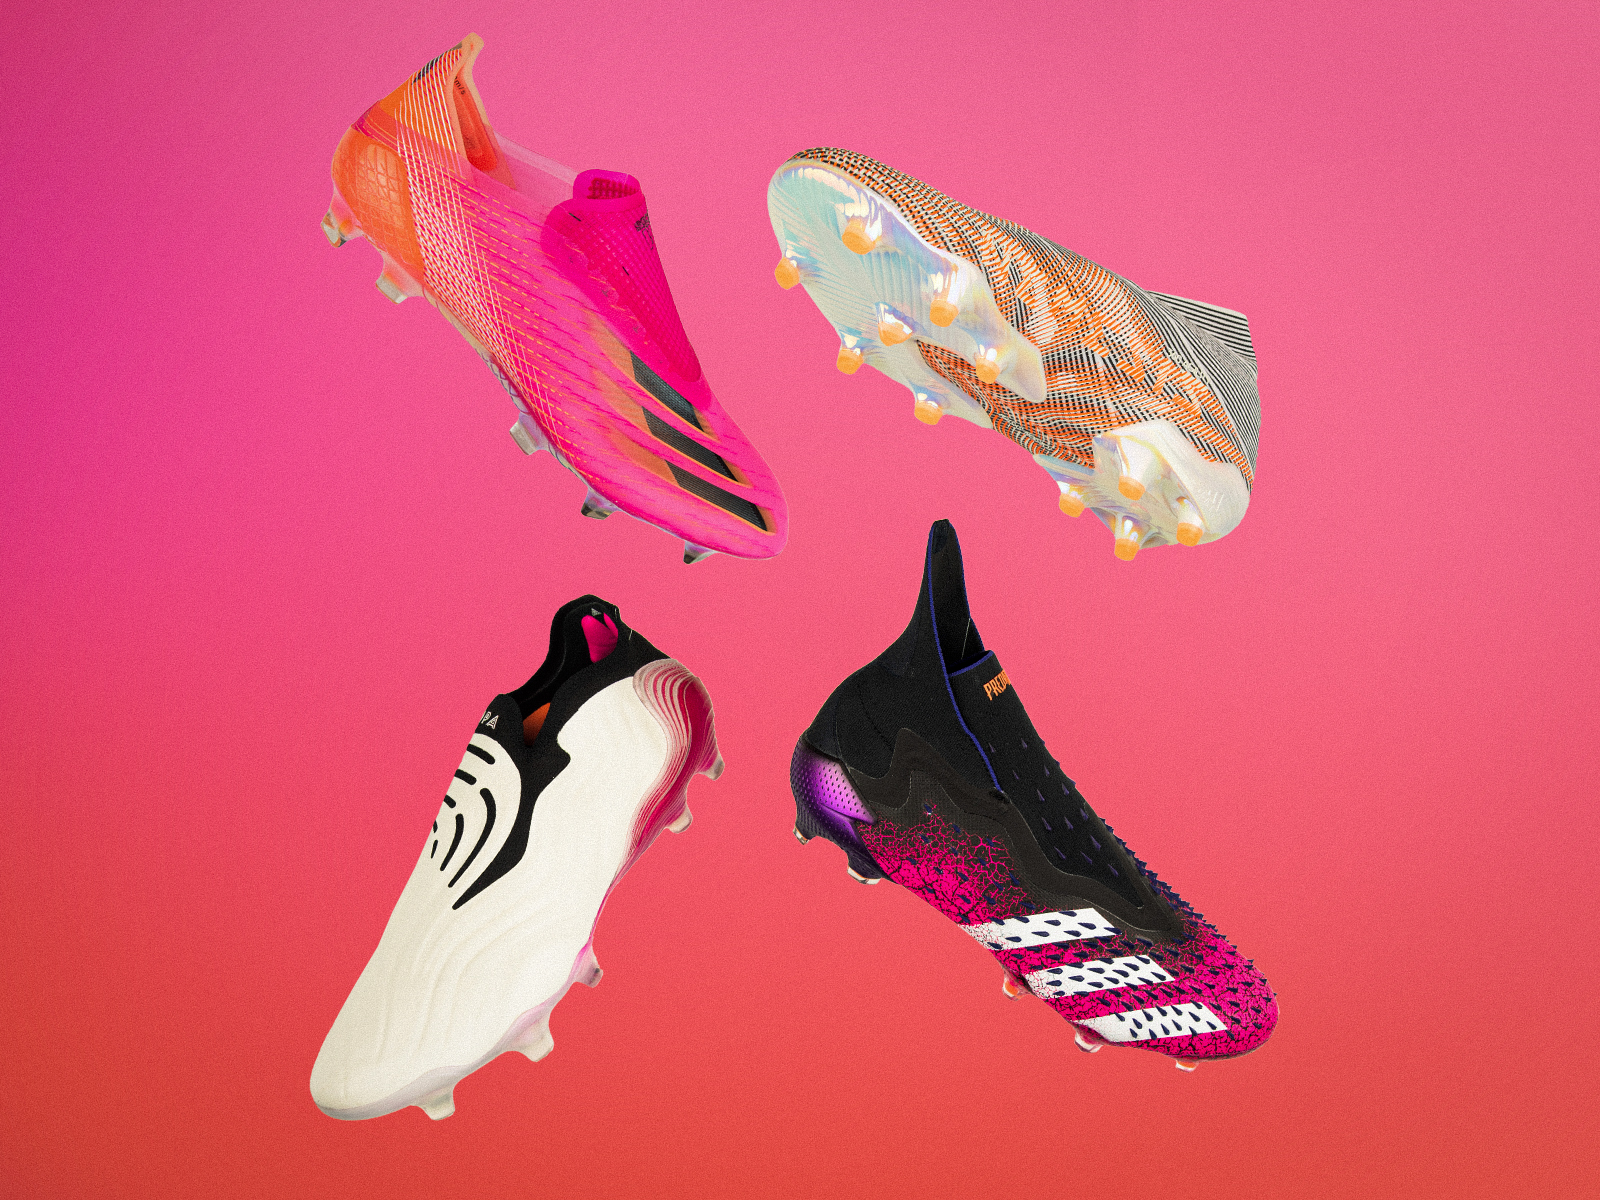 adidas Superspectral pack